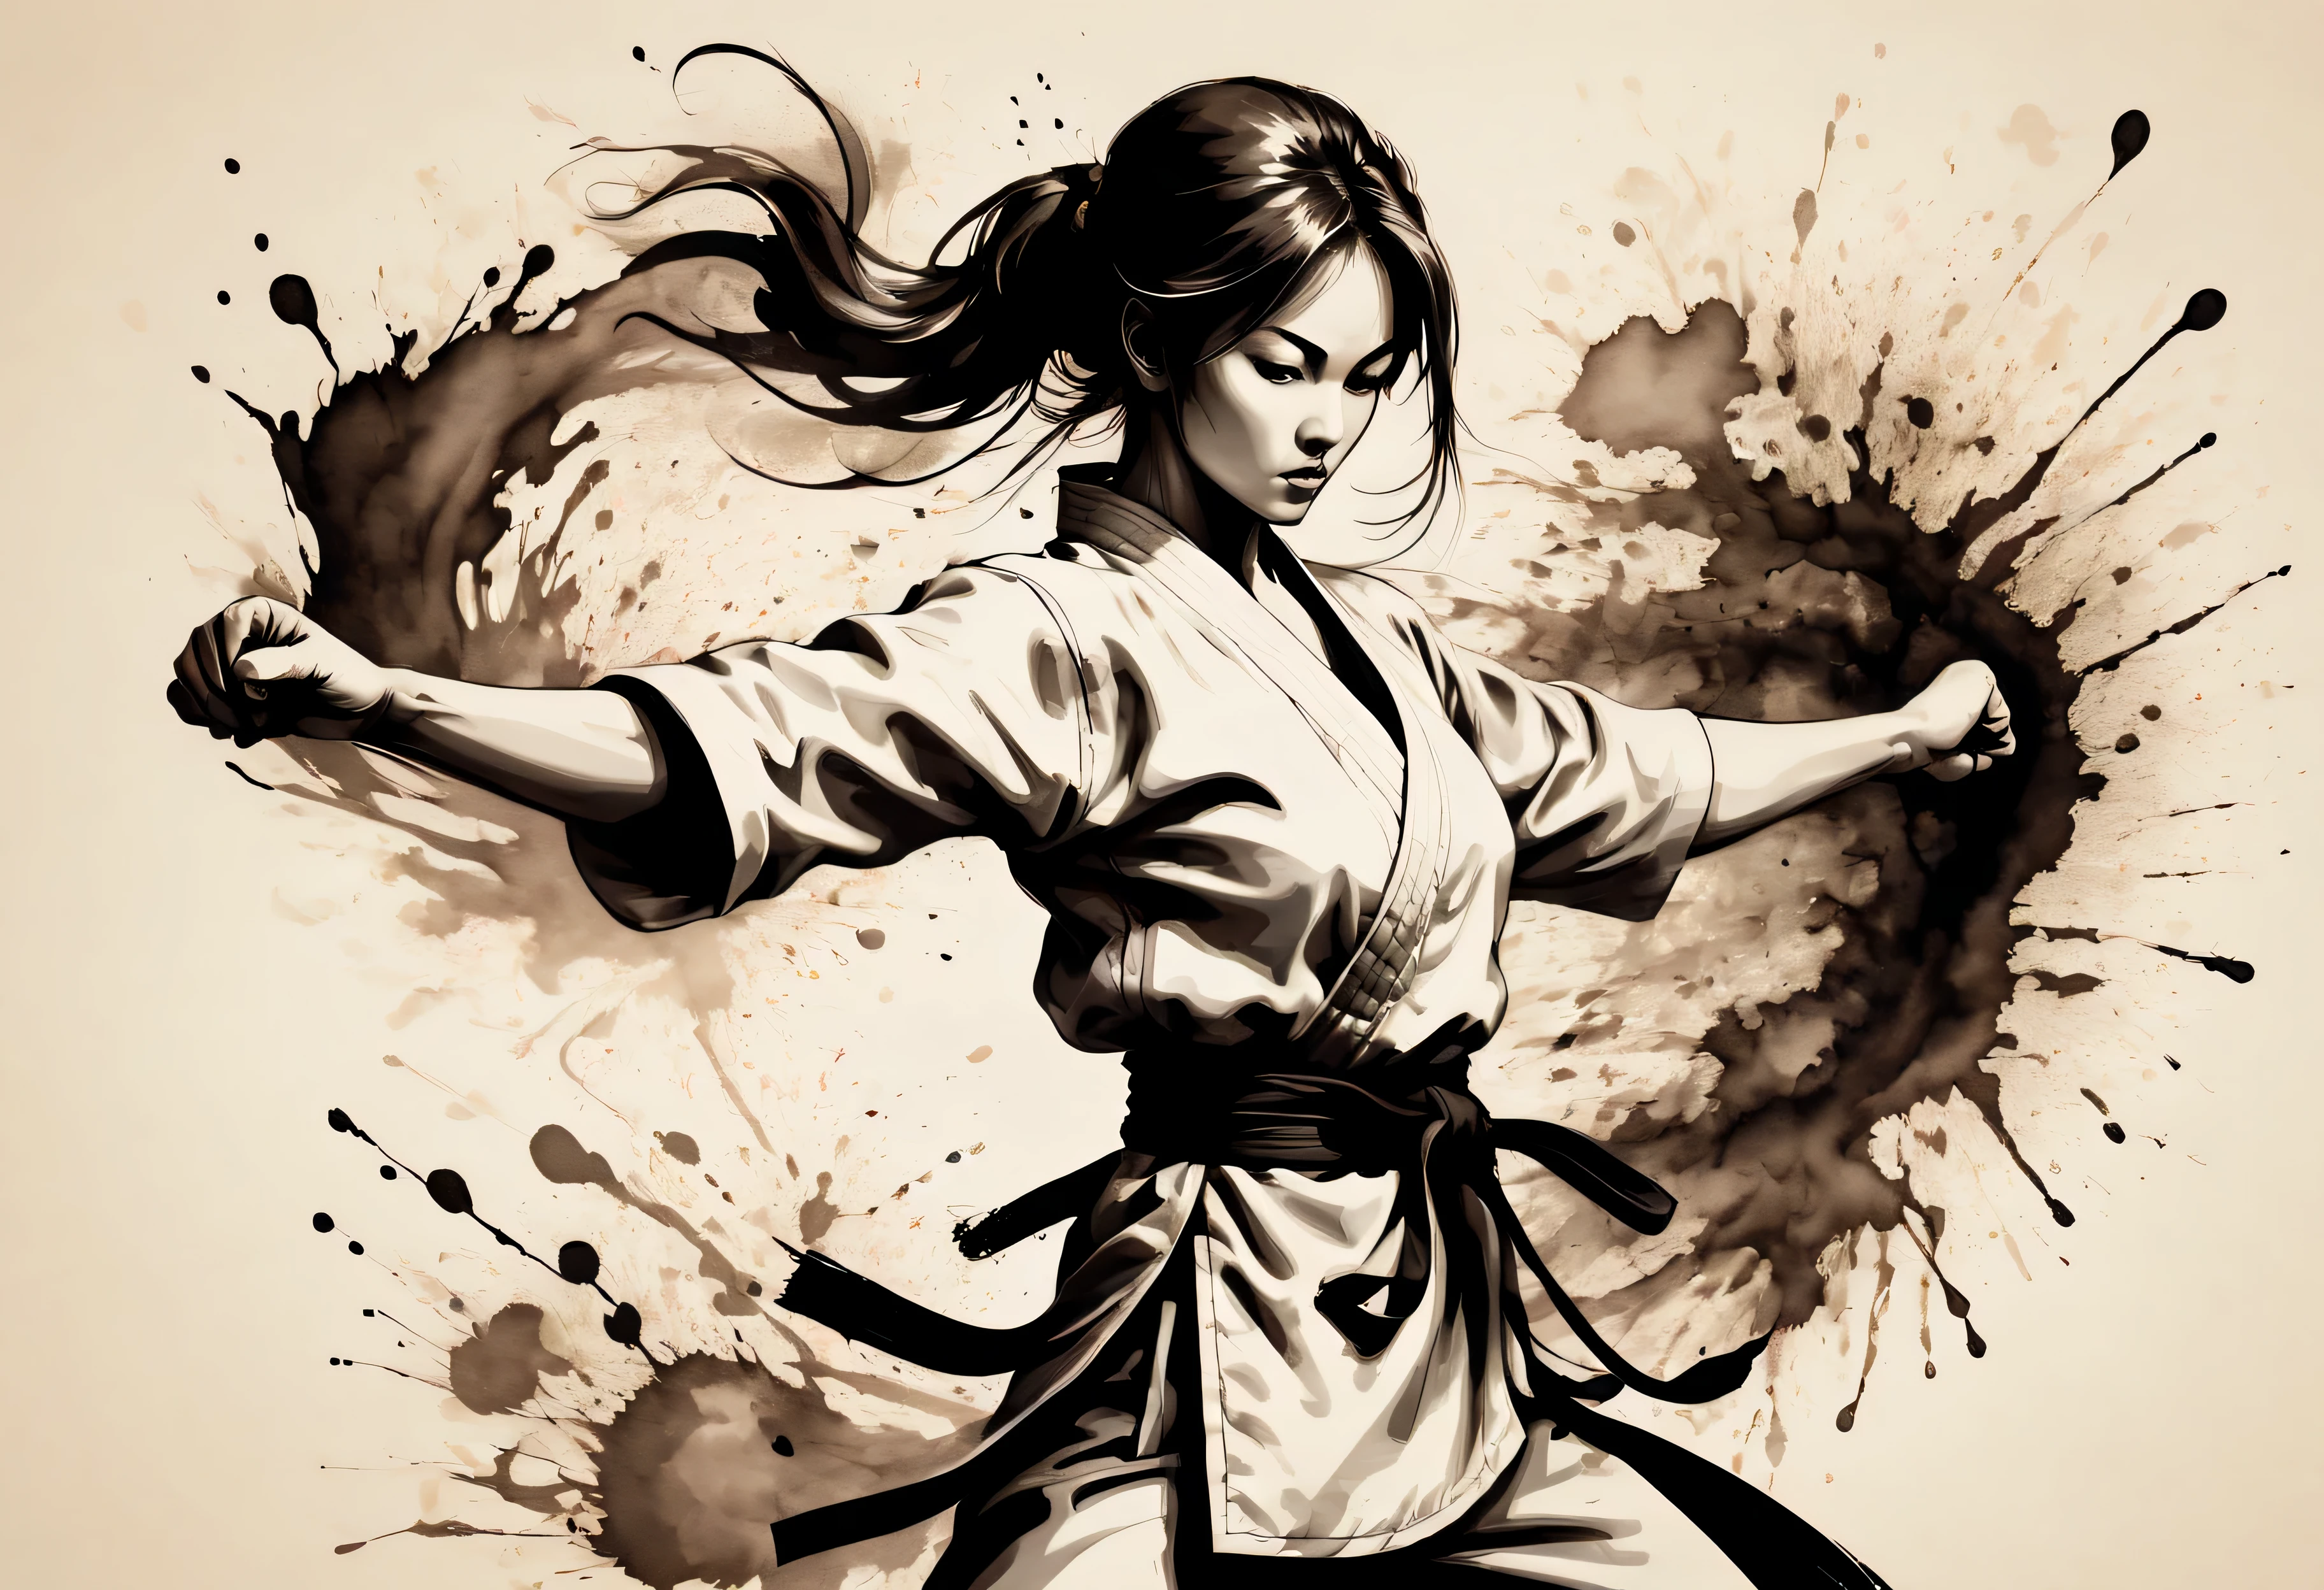 ((Violent_expression:1.2), ((Karate Kumite):1.5), ((2 Female):1.3) ((Female Karate):1.2), ((Hourglass_figure):1.1). ((Trading blows):1.3), | Outlined in black ink, the figure is depicted with smooth lines, expressing emotions and posture through the contrast of ink density. The background is minimalist, emphasizing light, shadow, and spatial perception.